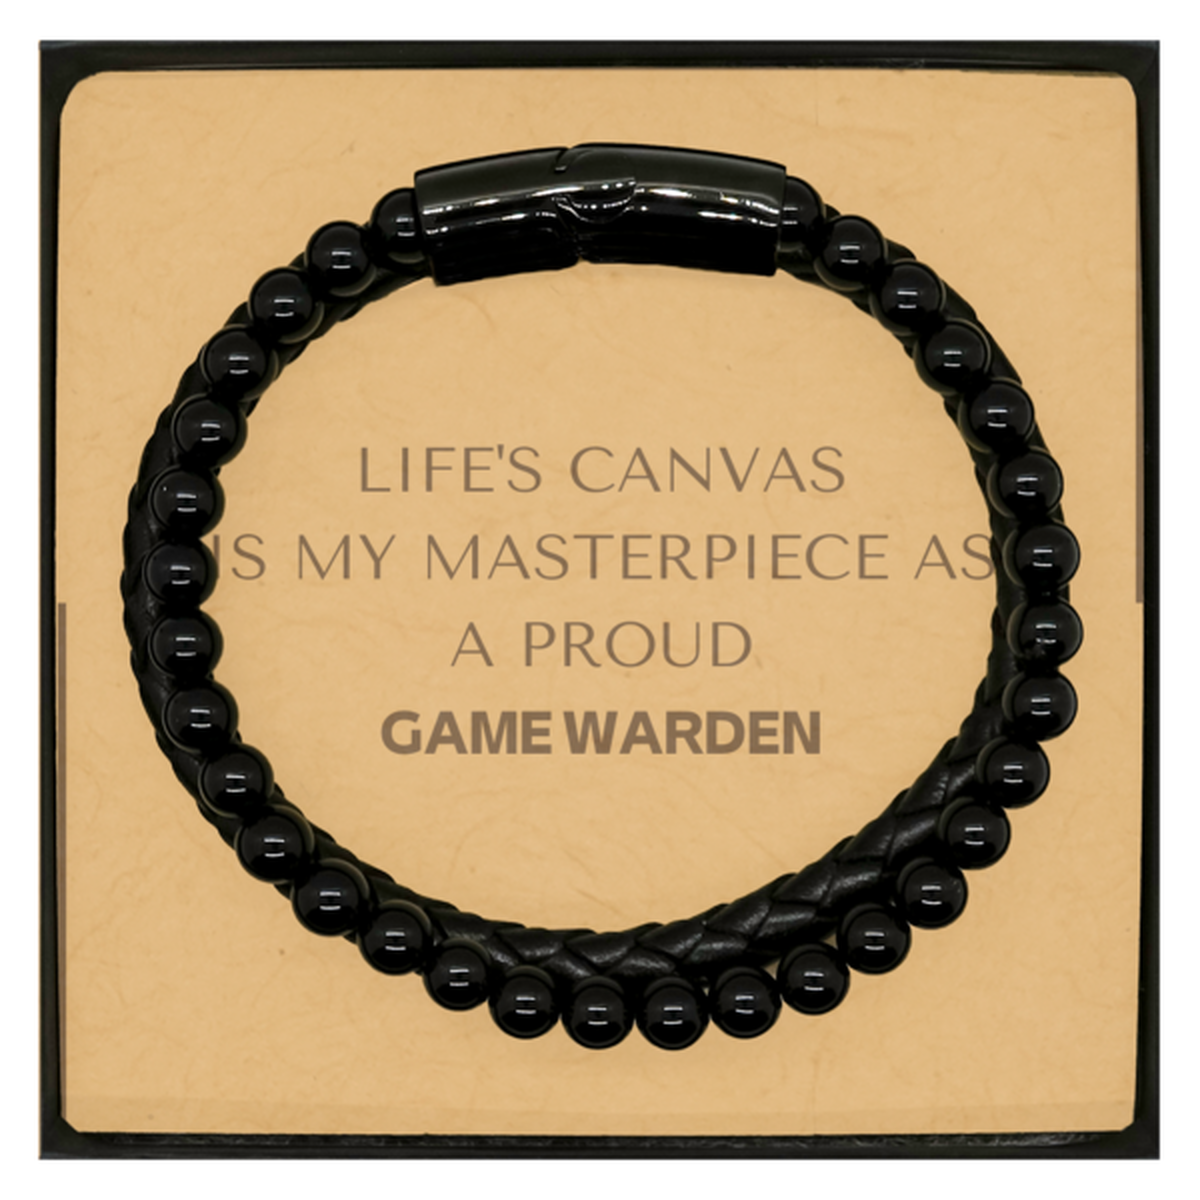 Proud Game Warden Gifts, Life's canvas is my masterpiece, Epic Birthday Christmas Unique Stone Leather Bracelets For Game Warden, Coworkers, Men, Women, Friends